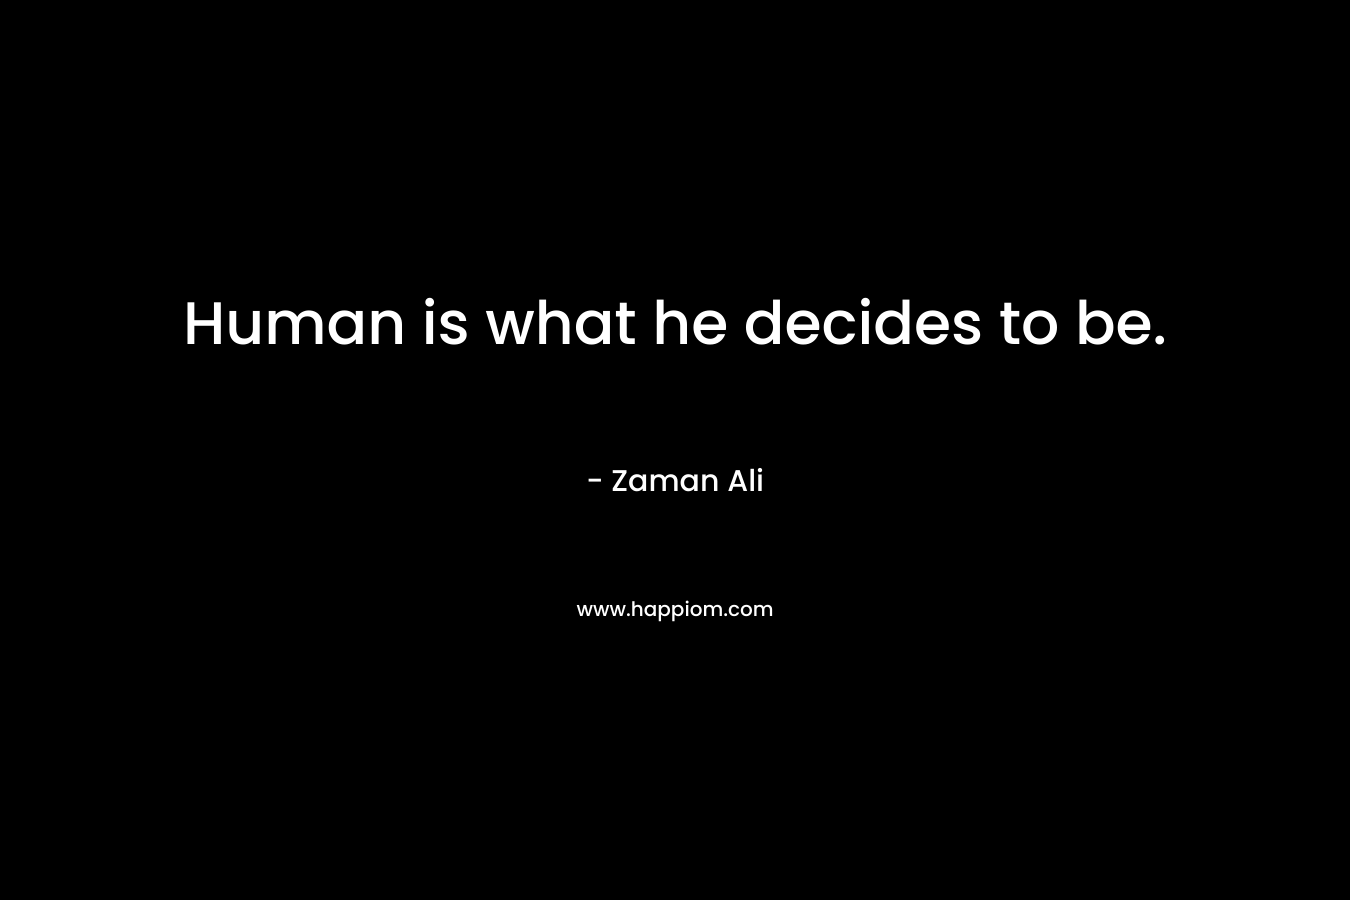 Human is what he decides to be.